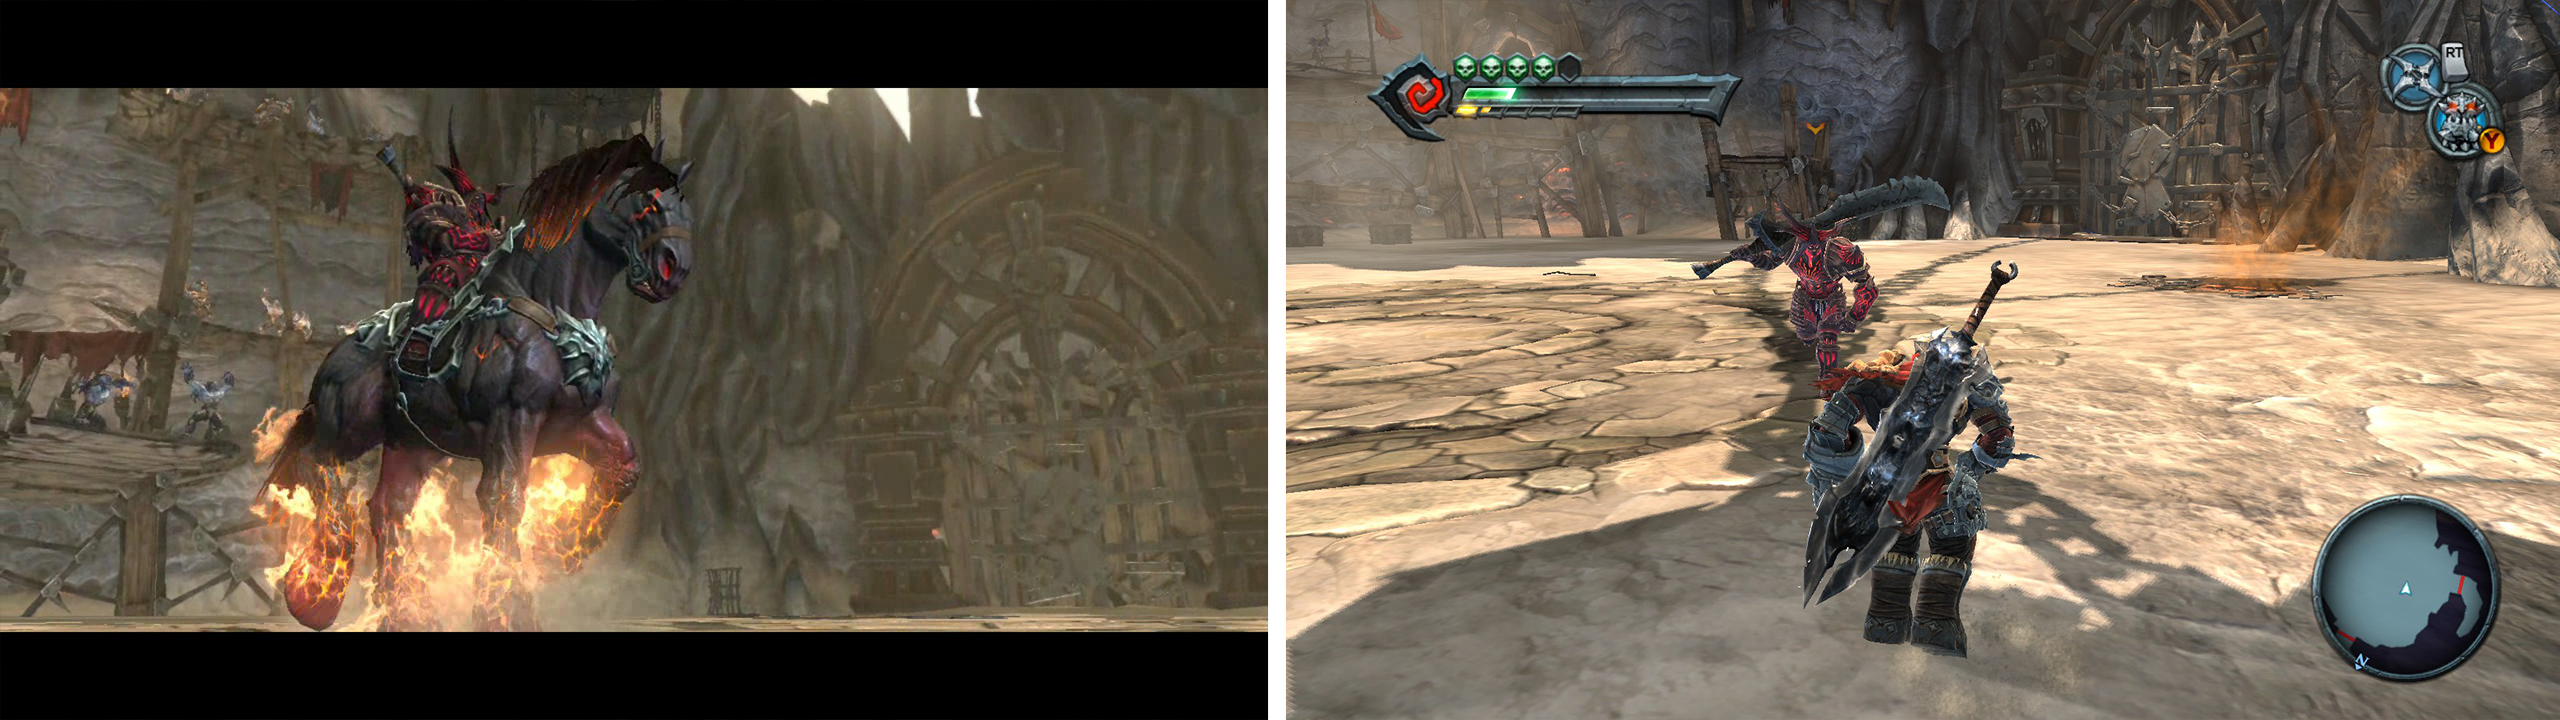 During the first phase, the Arena master will attack from horseback (left). During the second phase, hell fight from the ground (right).